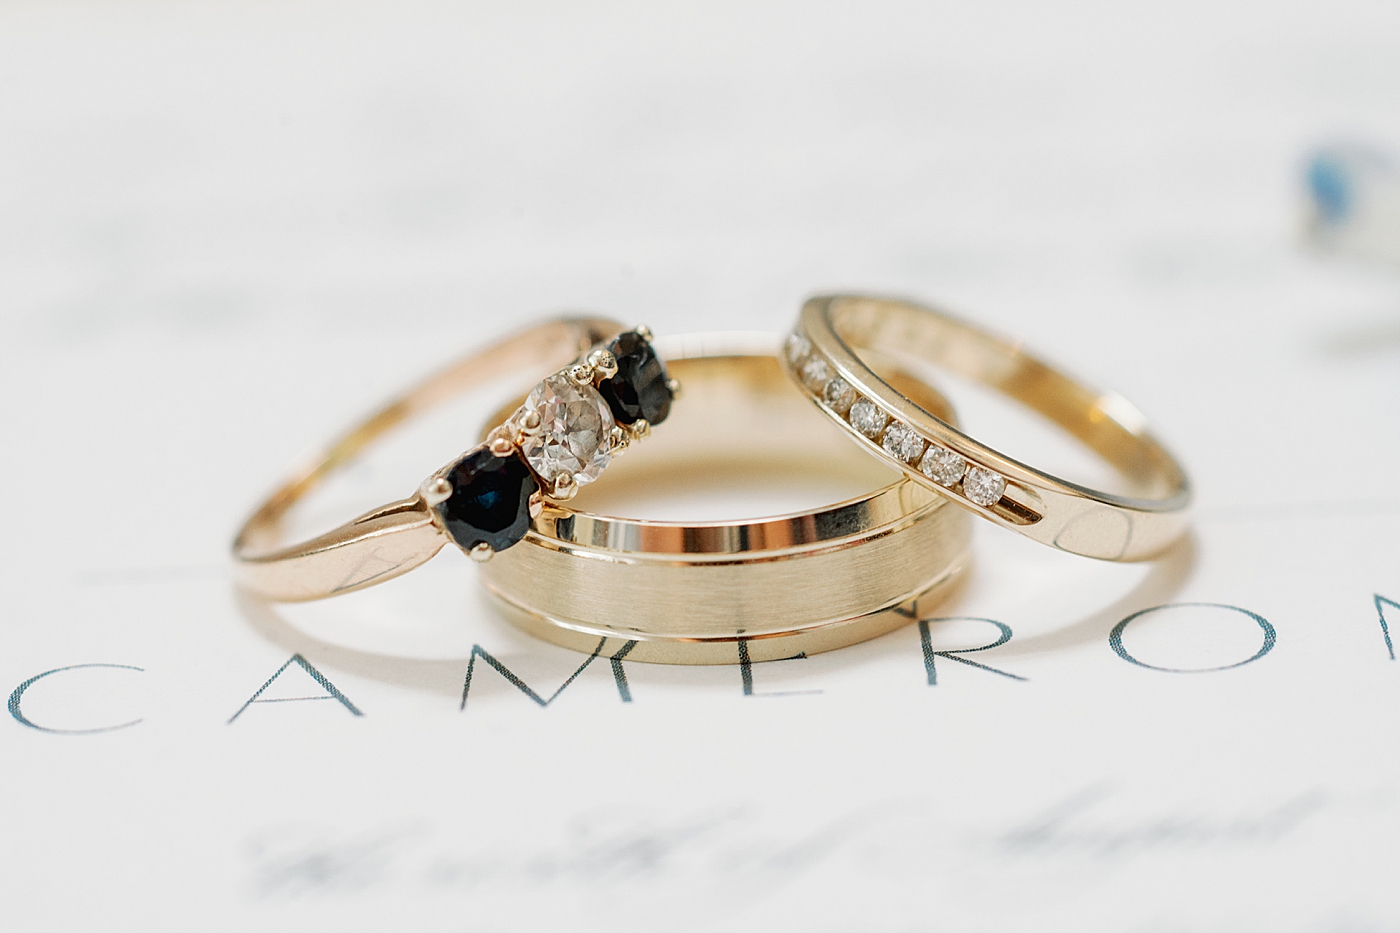 Wedding rings on an invitation | Images by Annie Laura Photography